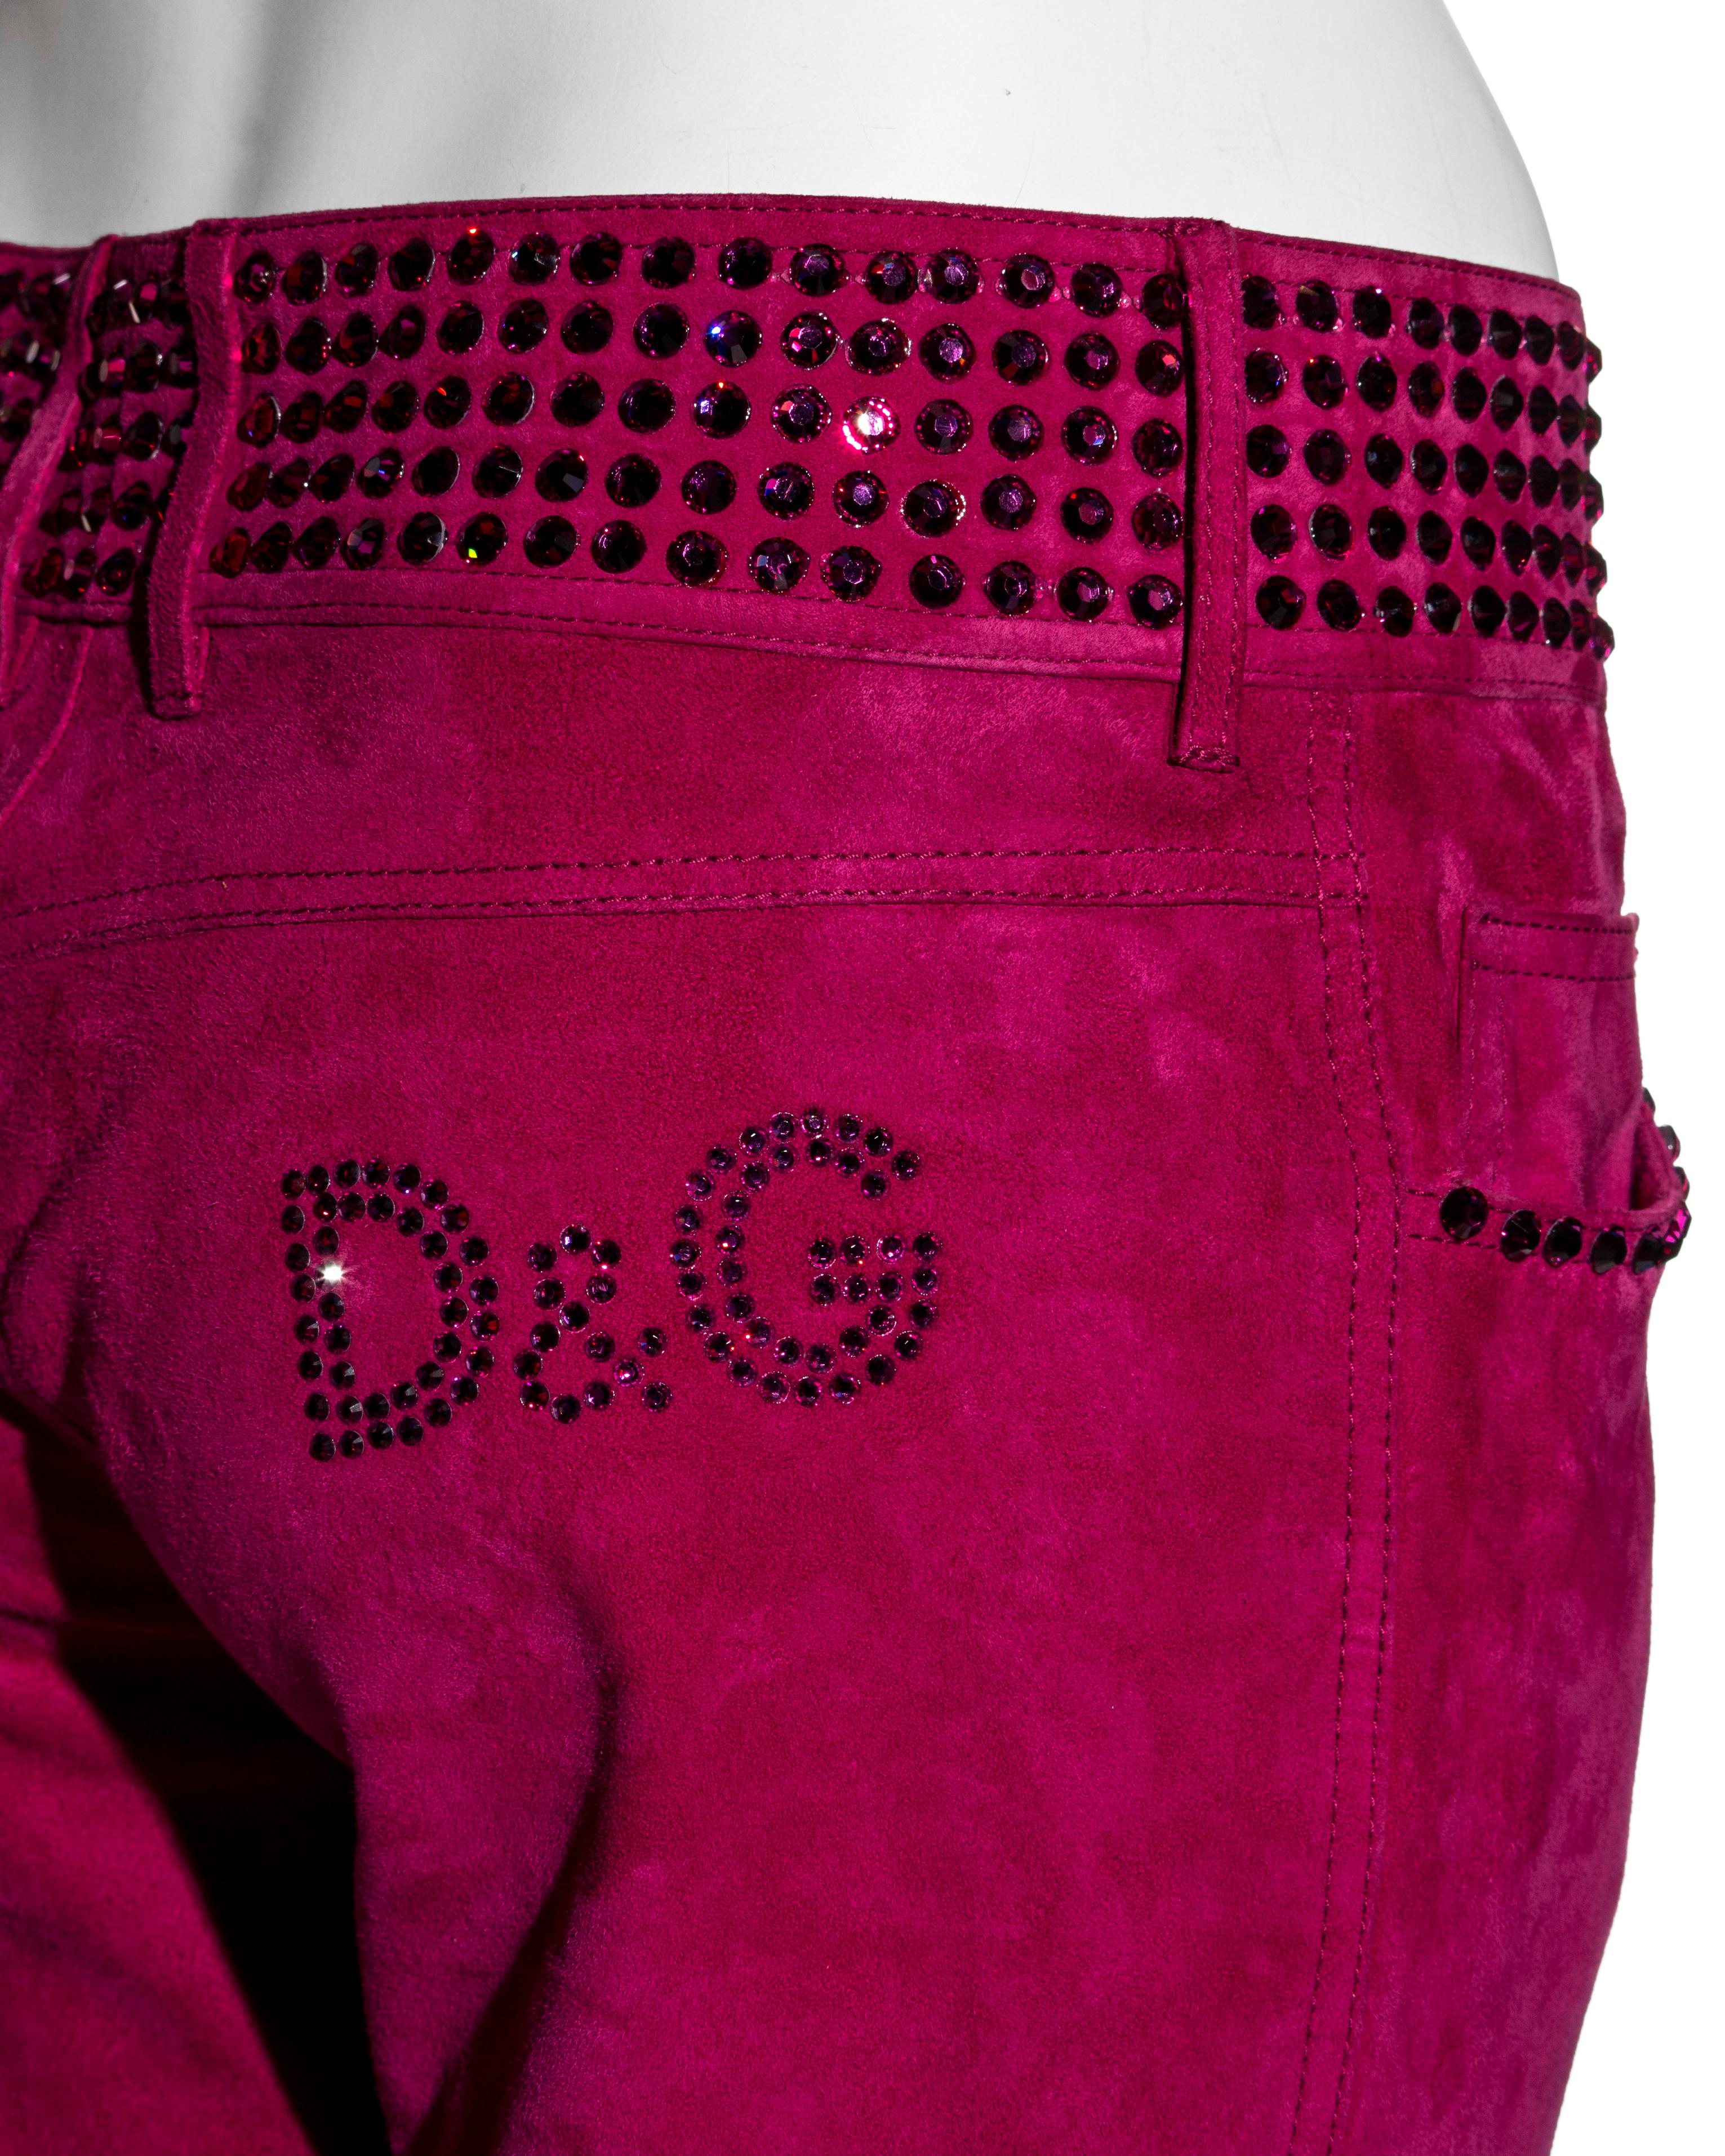 D&G by Dolce & Gabbana pink suede pants with crystals, c. 1998-1999 1